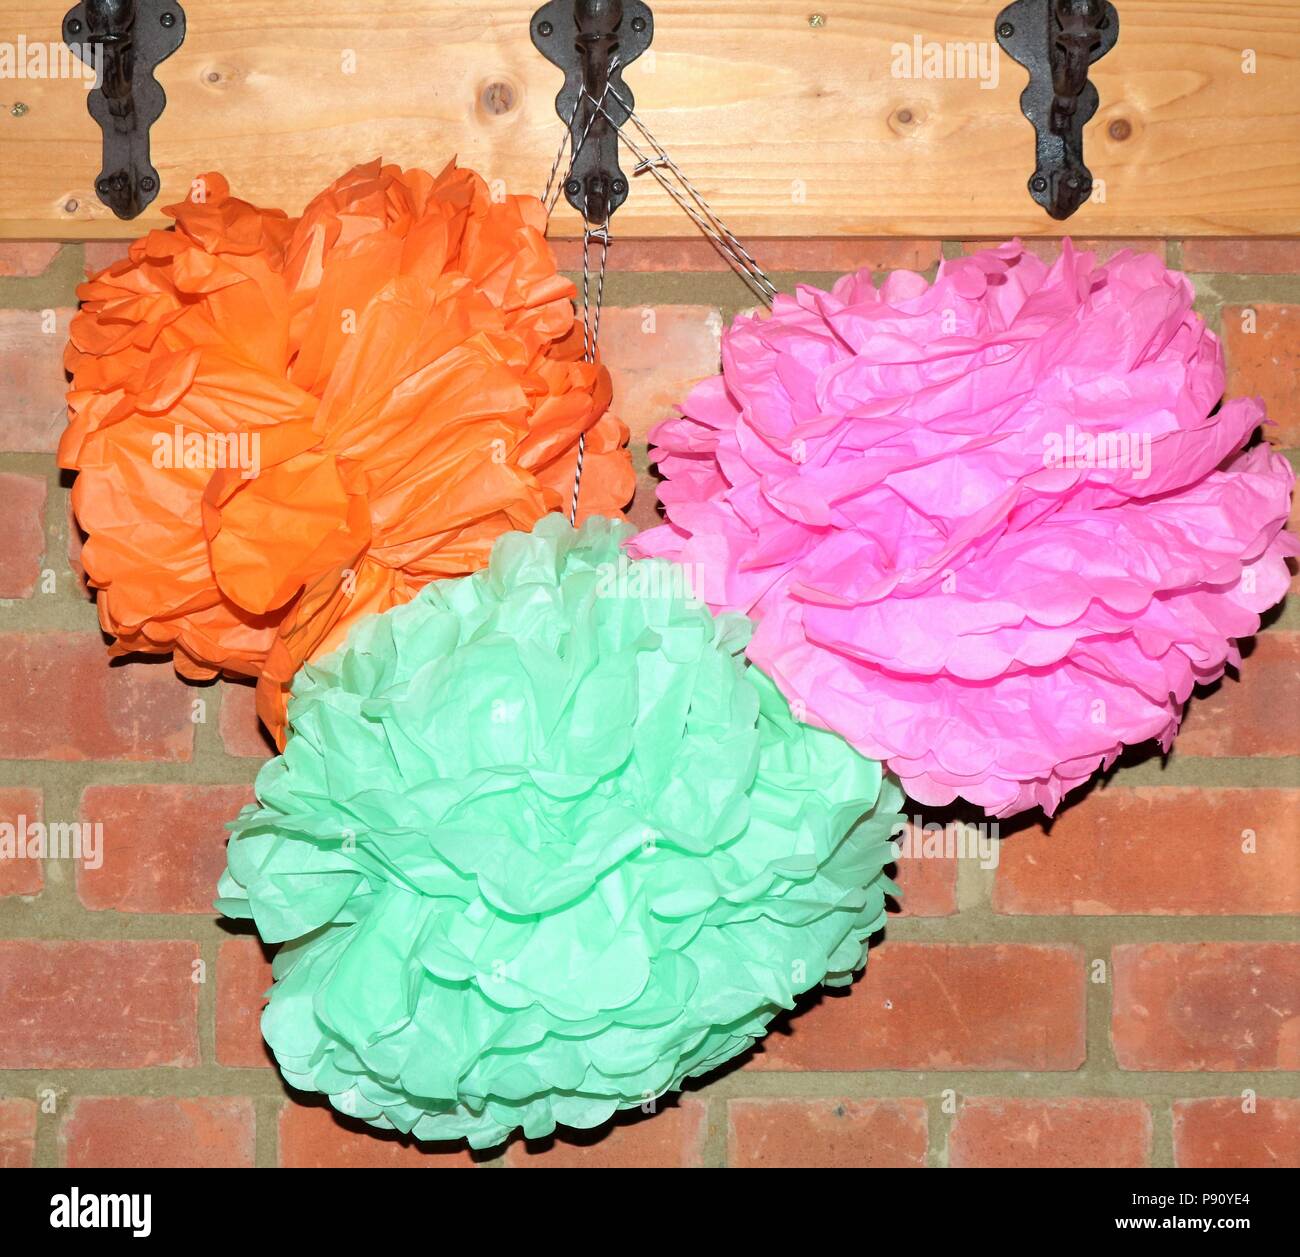 Colourful paper pom poms hanging on hooks against a brick wall. Stock Photo